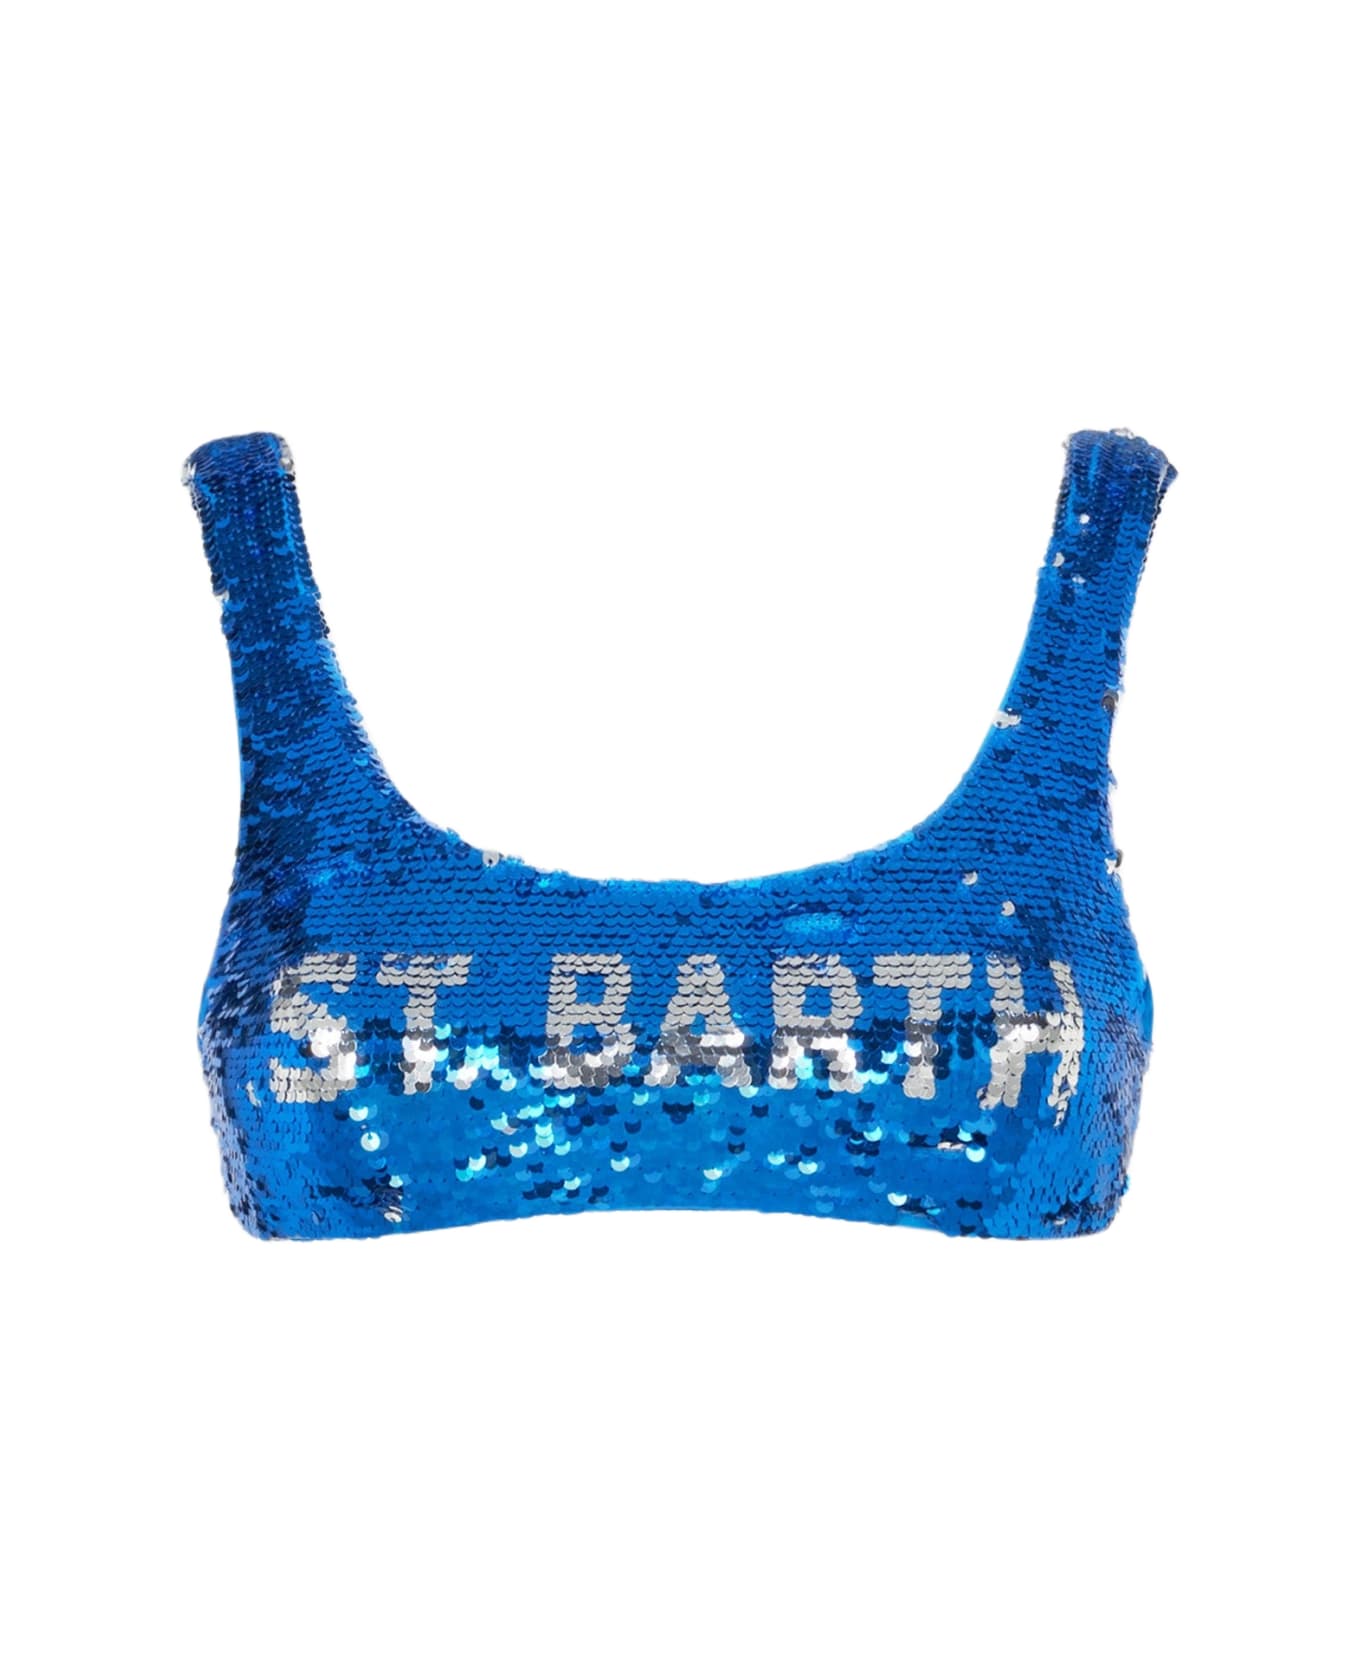 MC2 Saint Barth Blue Sequined Bralette With Silver Logo - BLUE